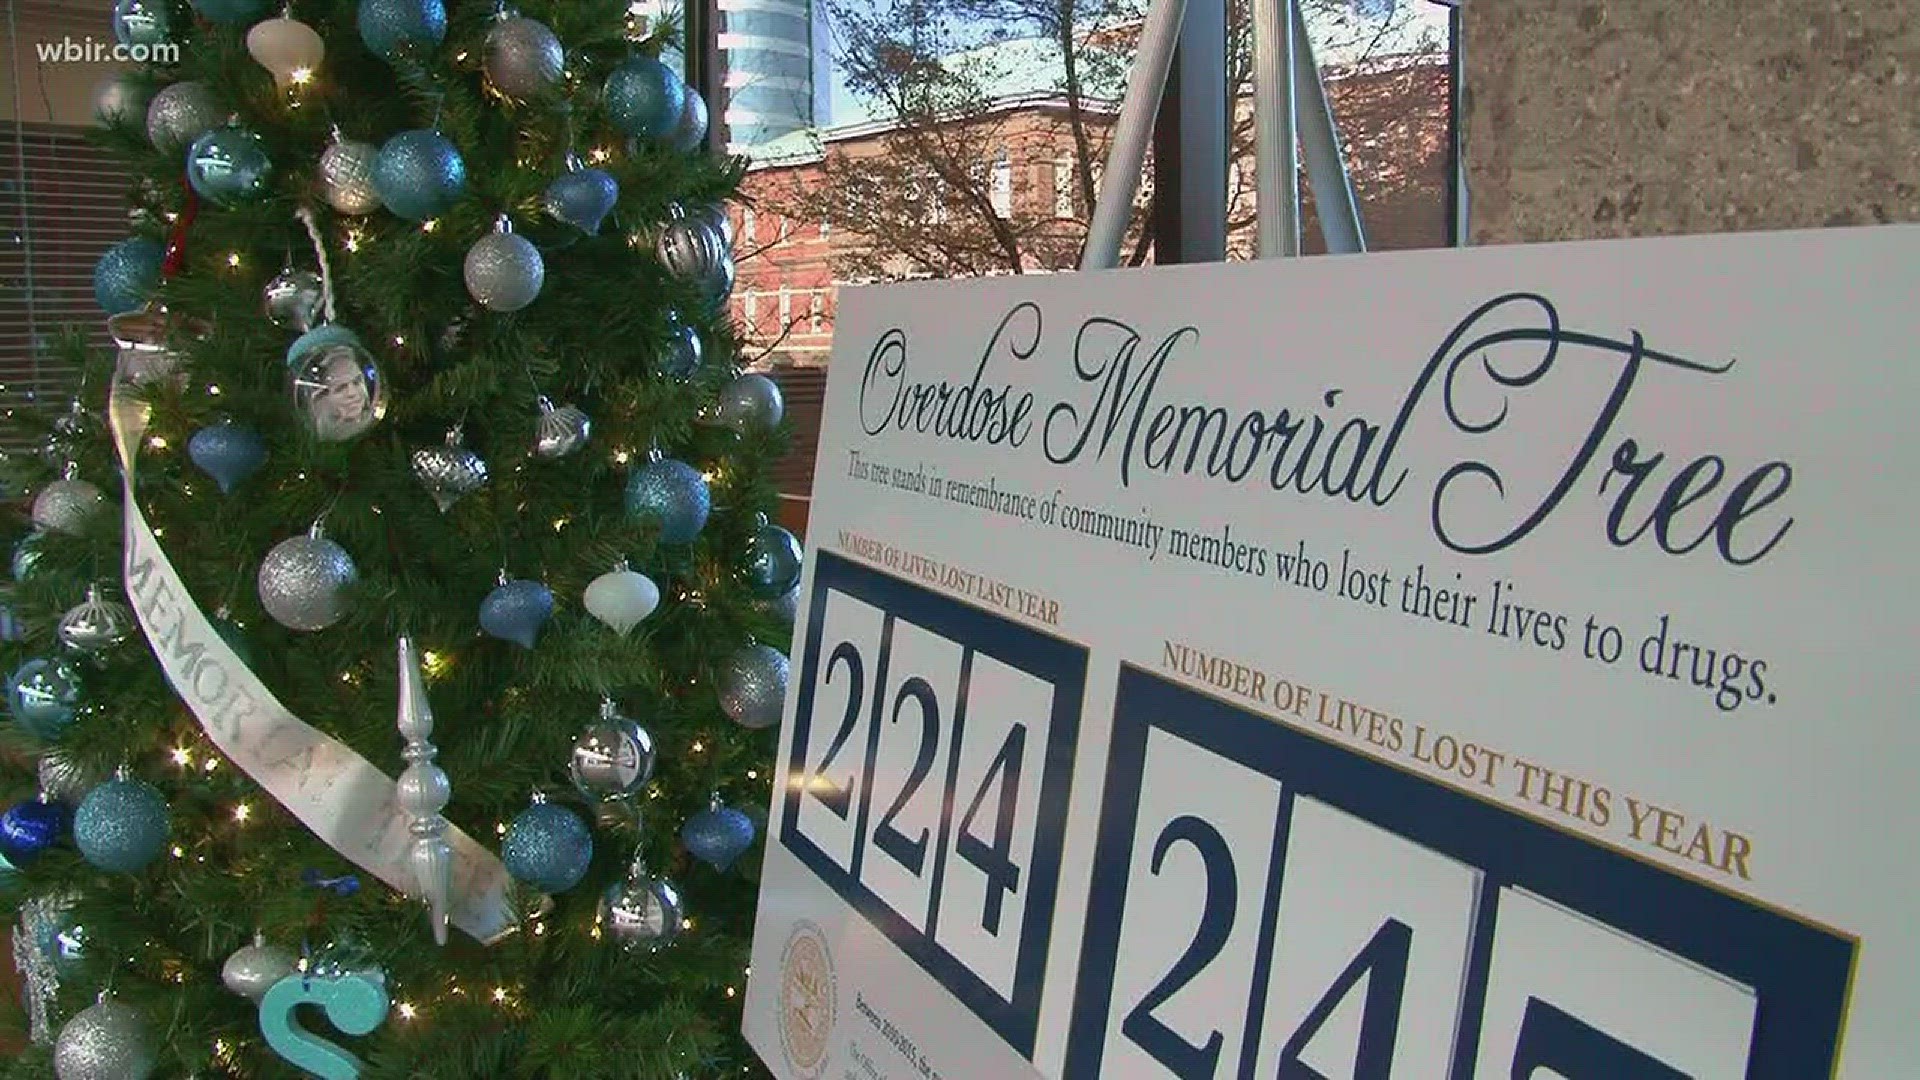 Nov. 29, 2017: To remember those lost to an overdose in Knox County, the District Attorney General's office has decorated an overdose memorial Christmas tree for families to visit.